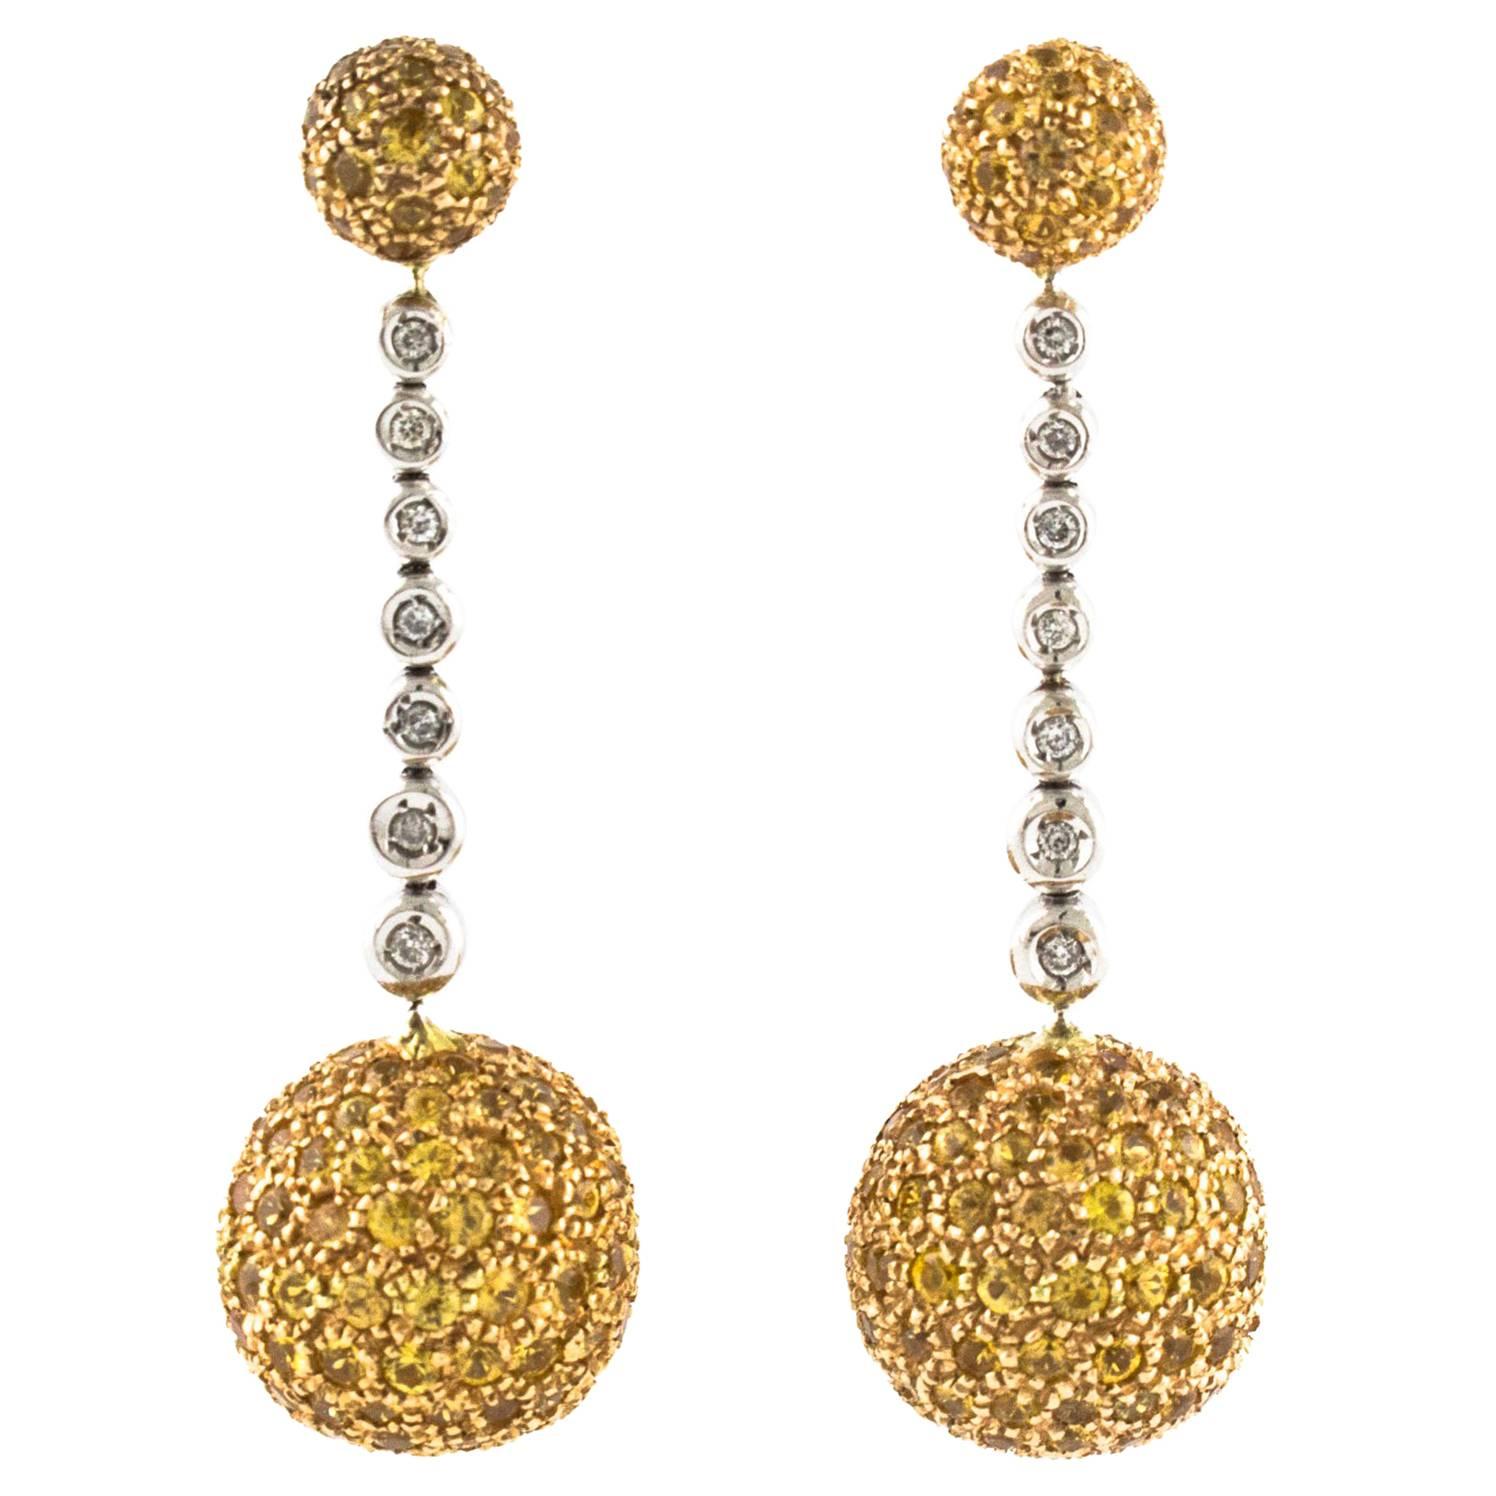 Dangling Earrings White Gold and Yellow Gold with Diamonds and Sapphires